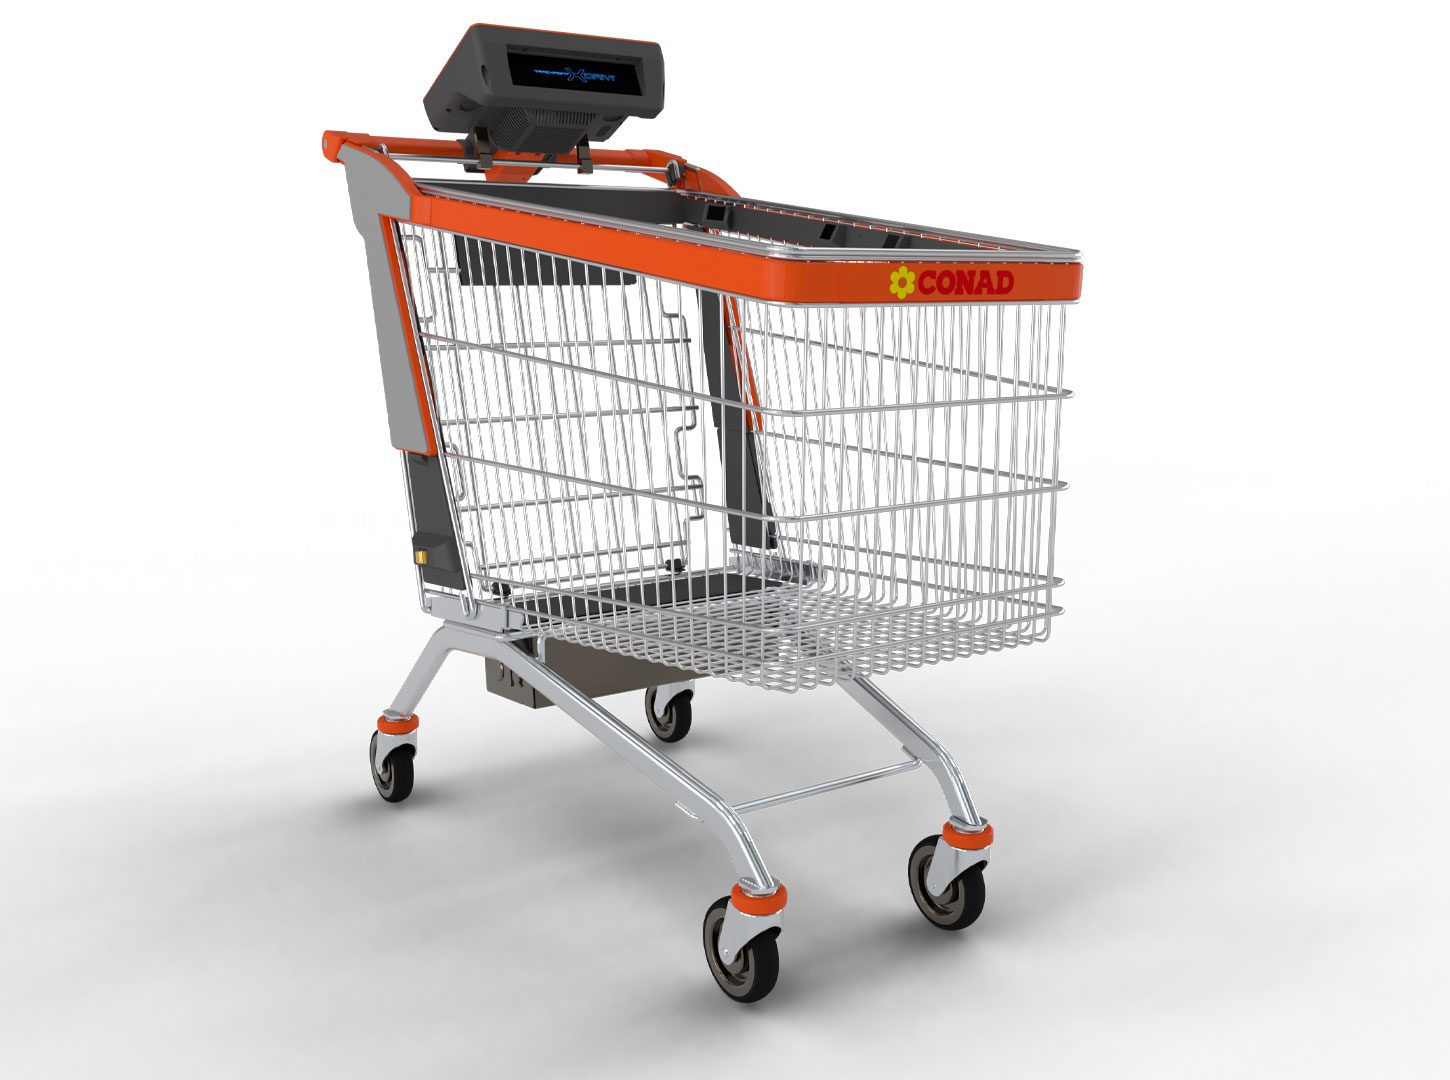 Tracxpoint's Conad branded Daivi smart shopping cart with AI